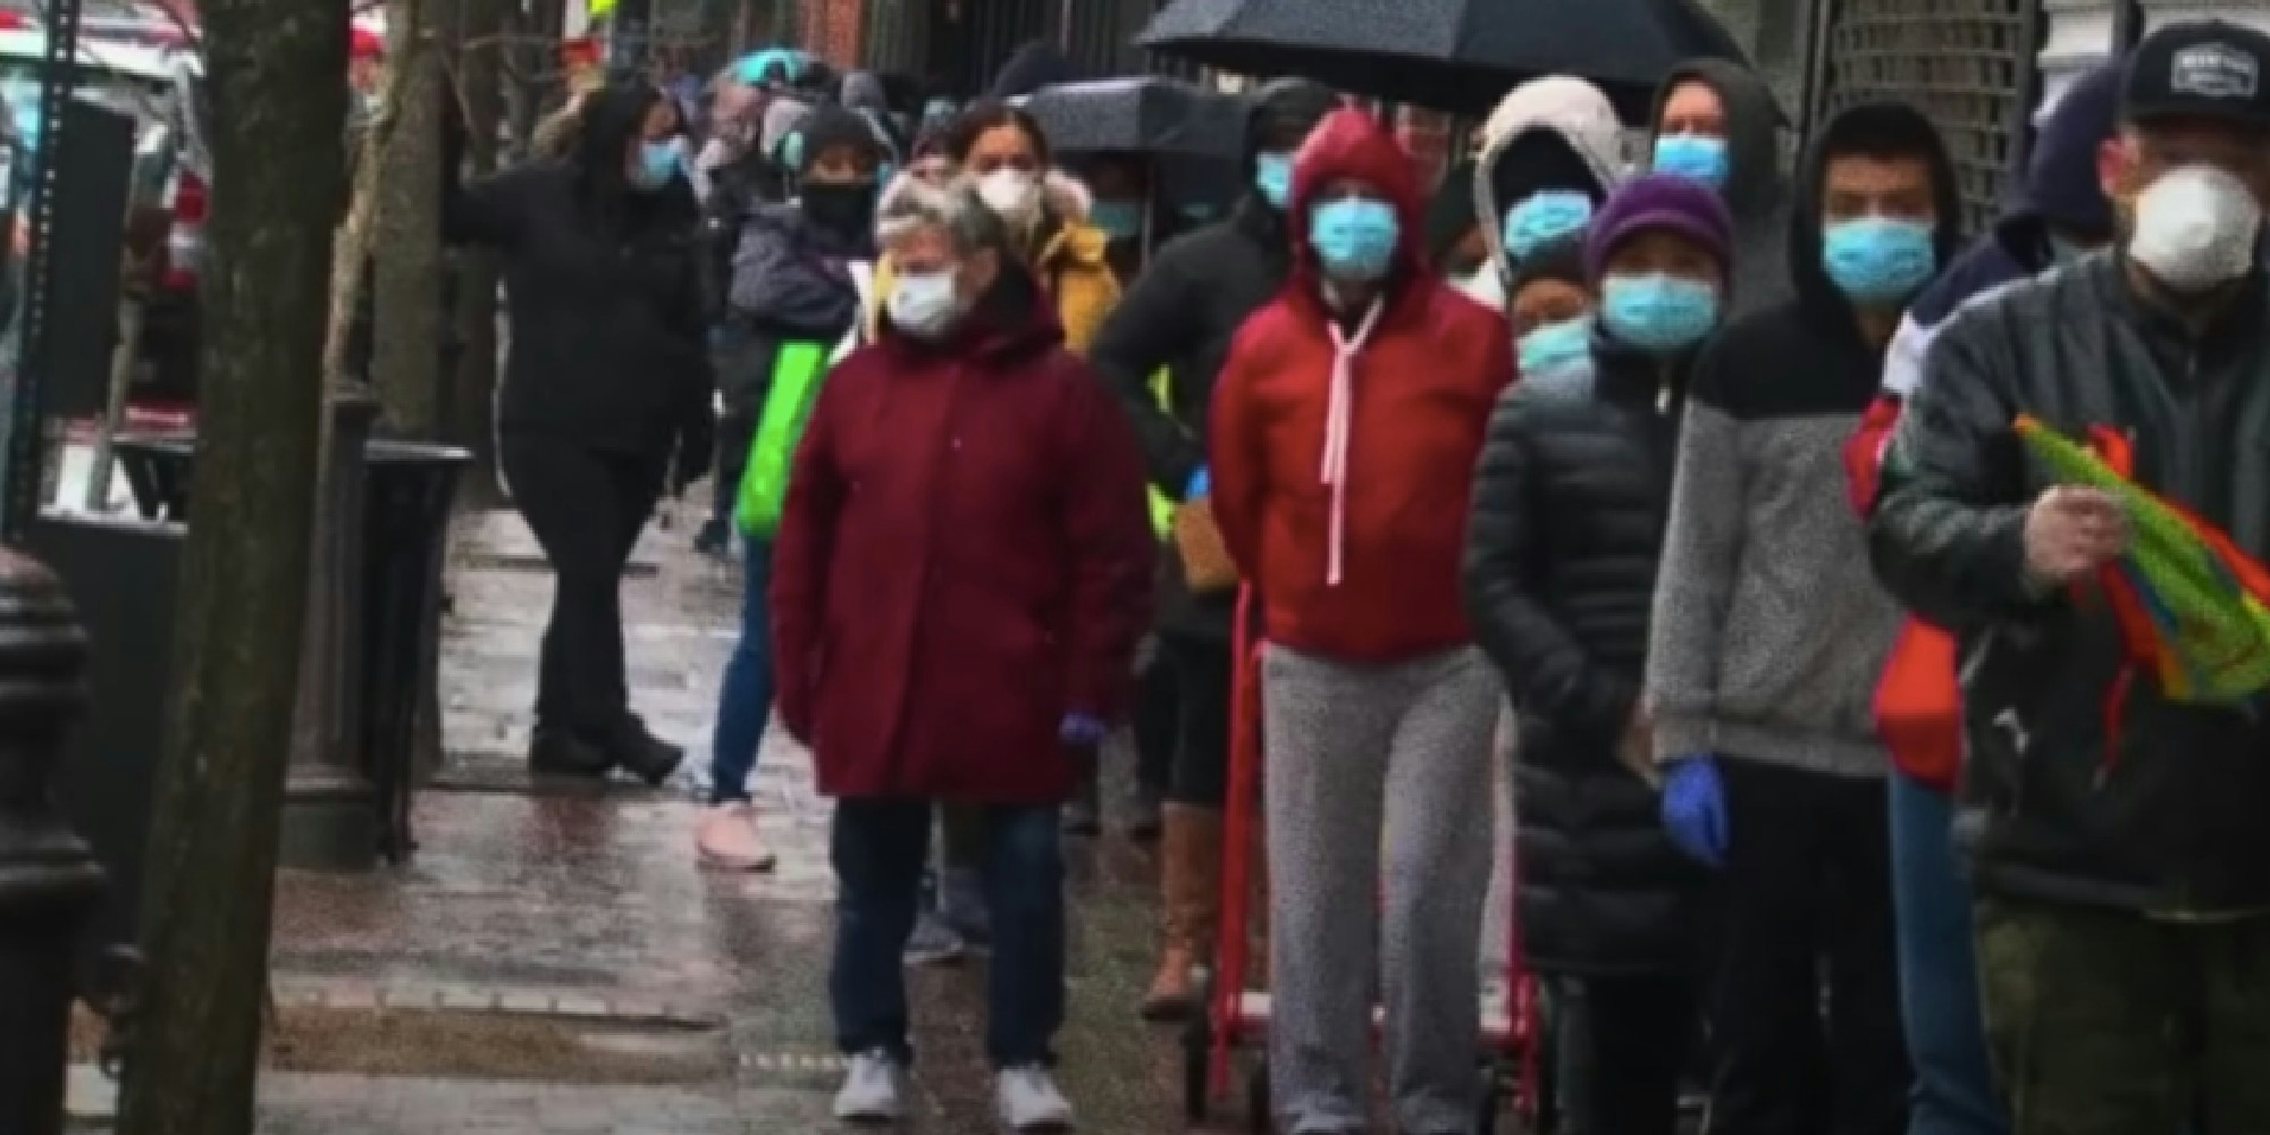 people waiting in line with face masks on